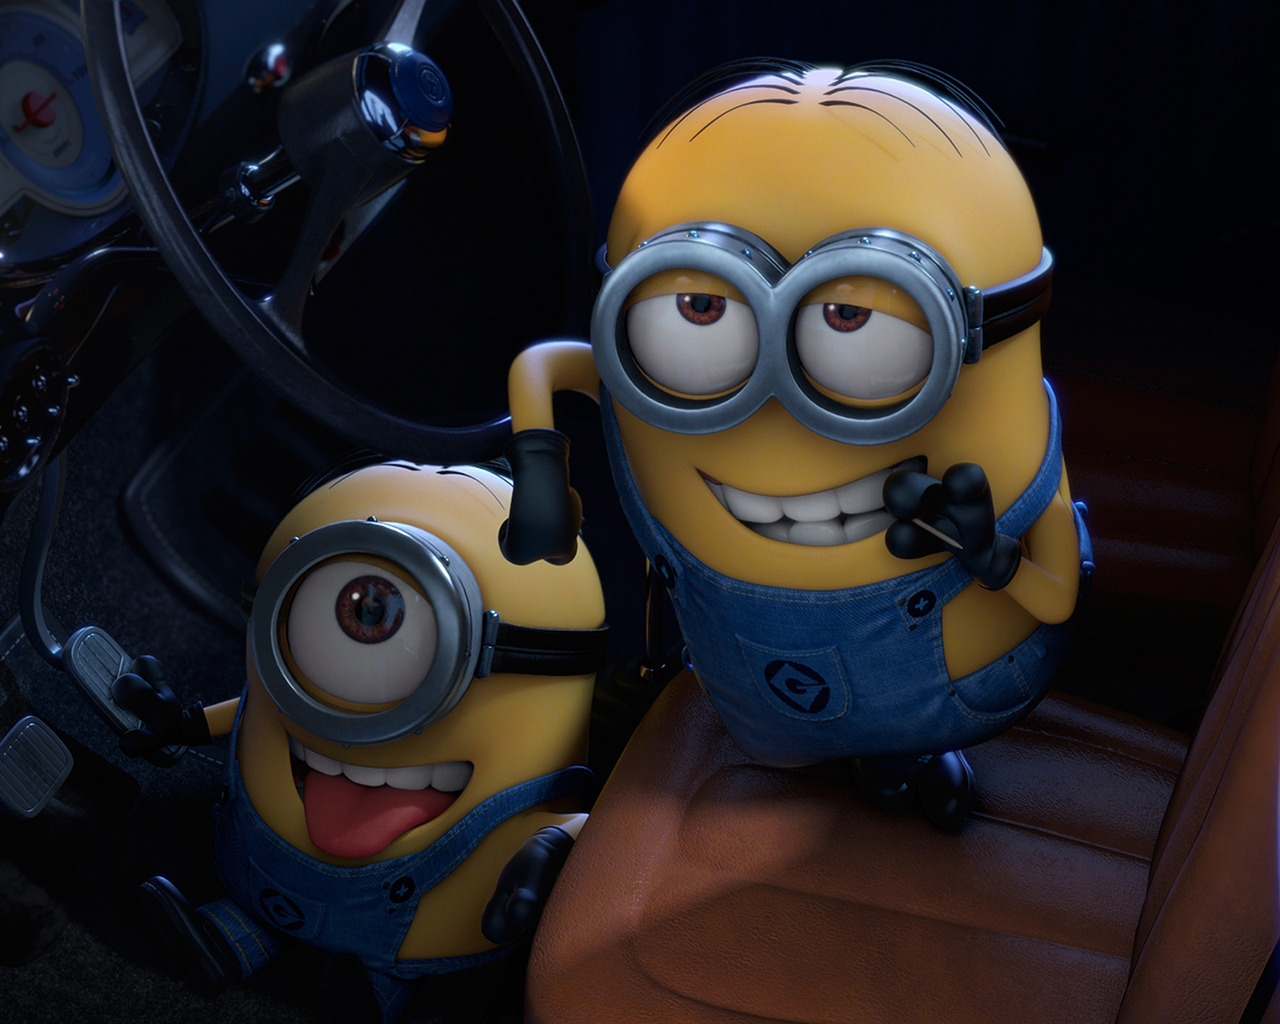 Minions for 1280 x 1024 resolution